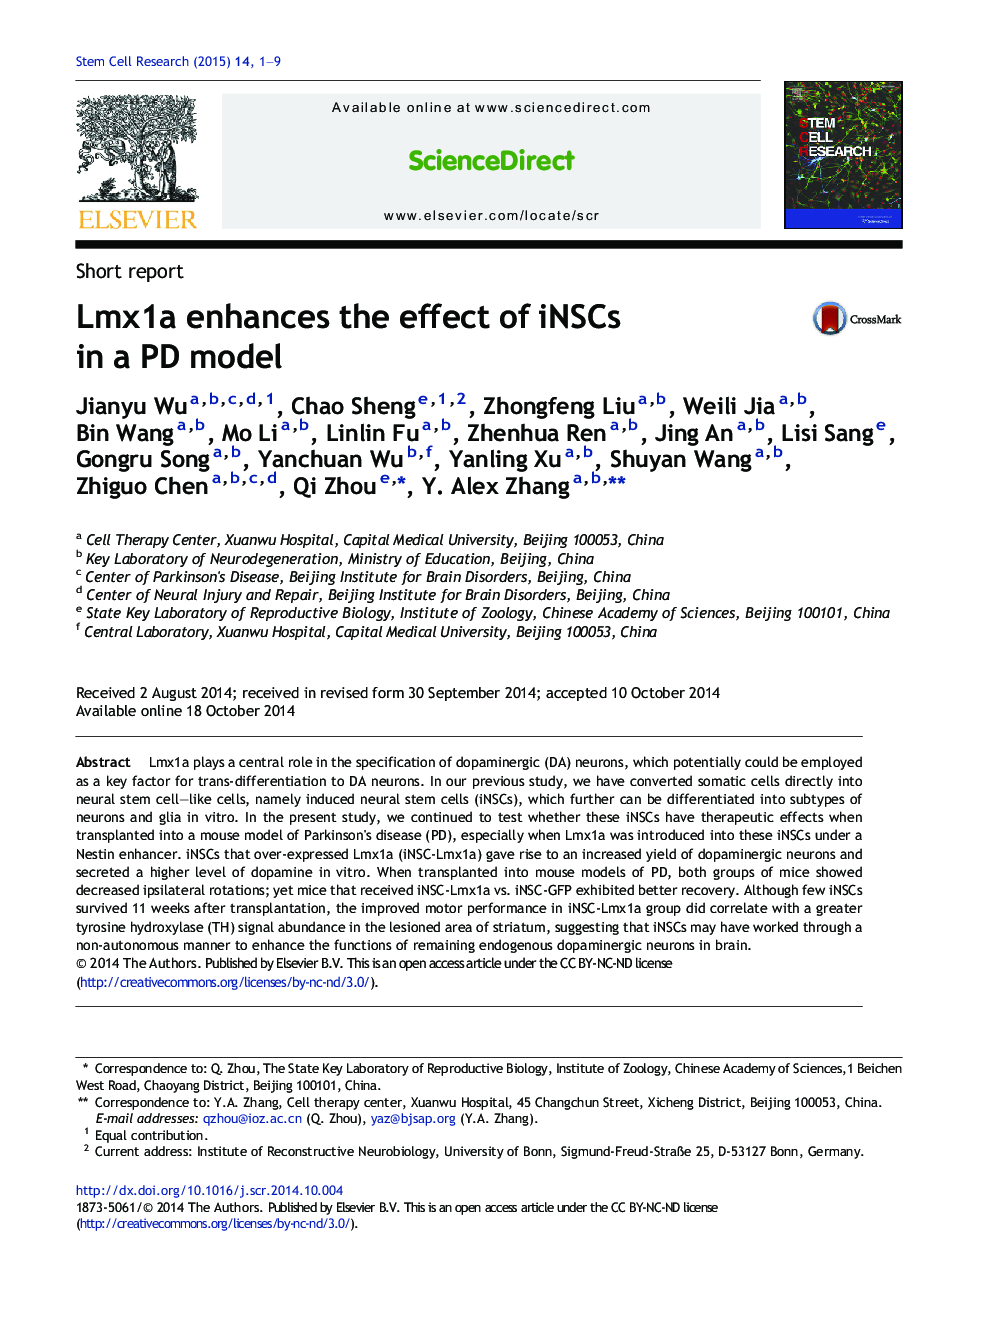 Lmx1a enhances the effect of iNSCs in a PD model